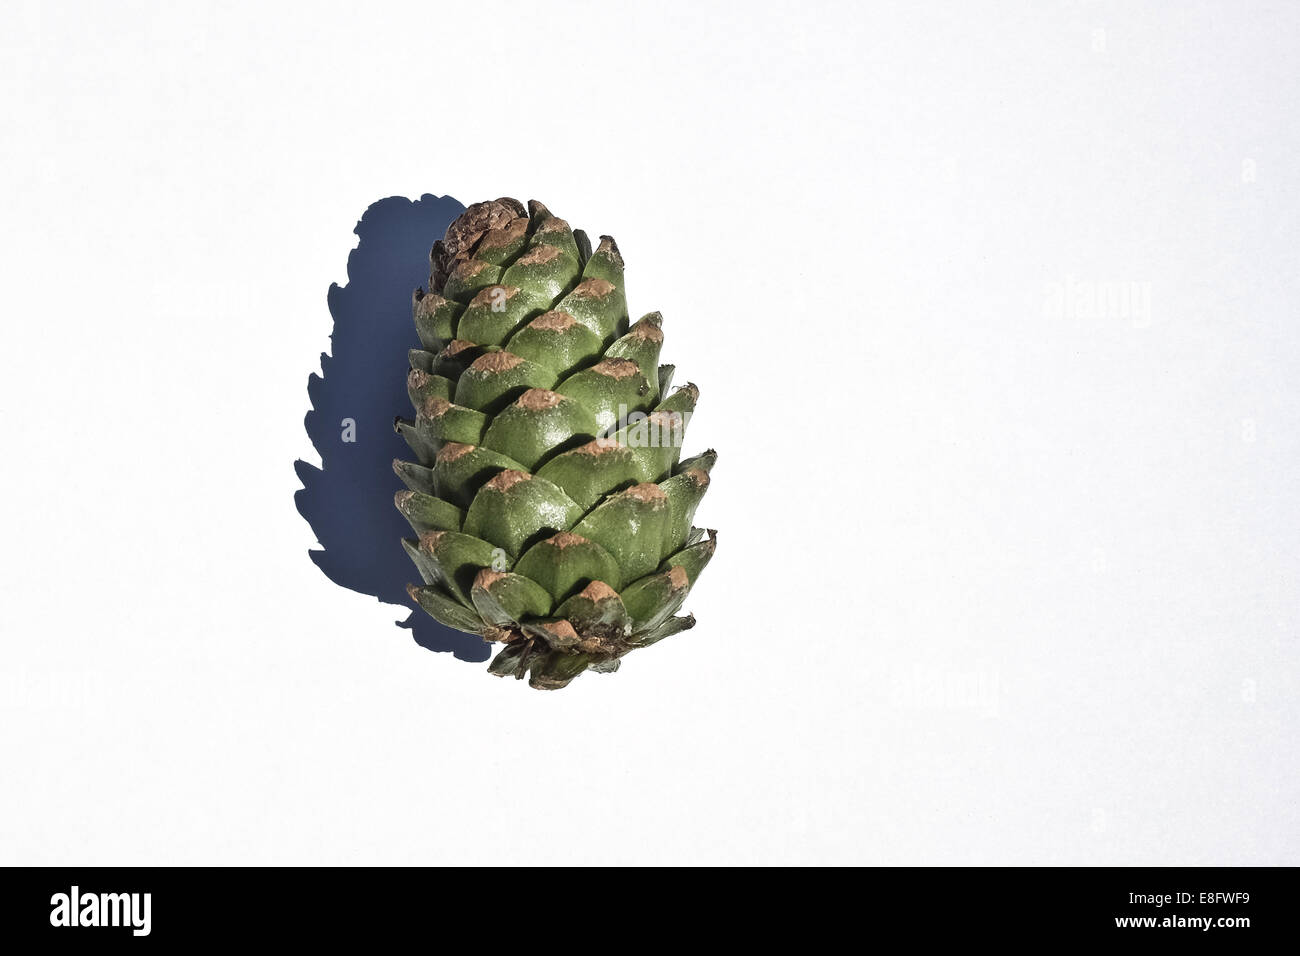 Pine cone against white background Stock Photo